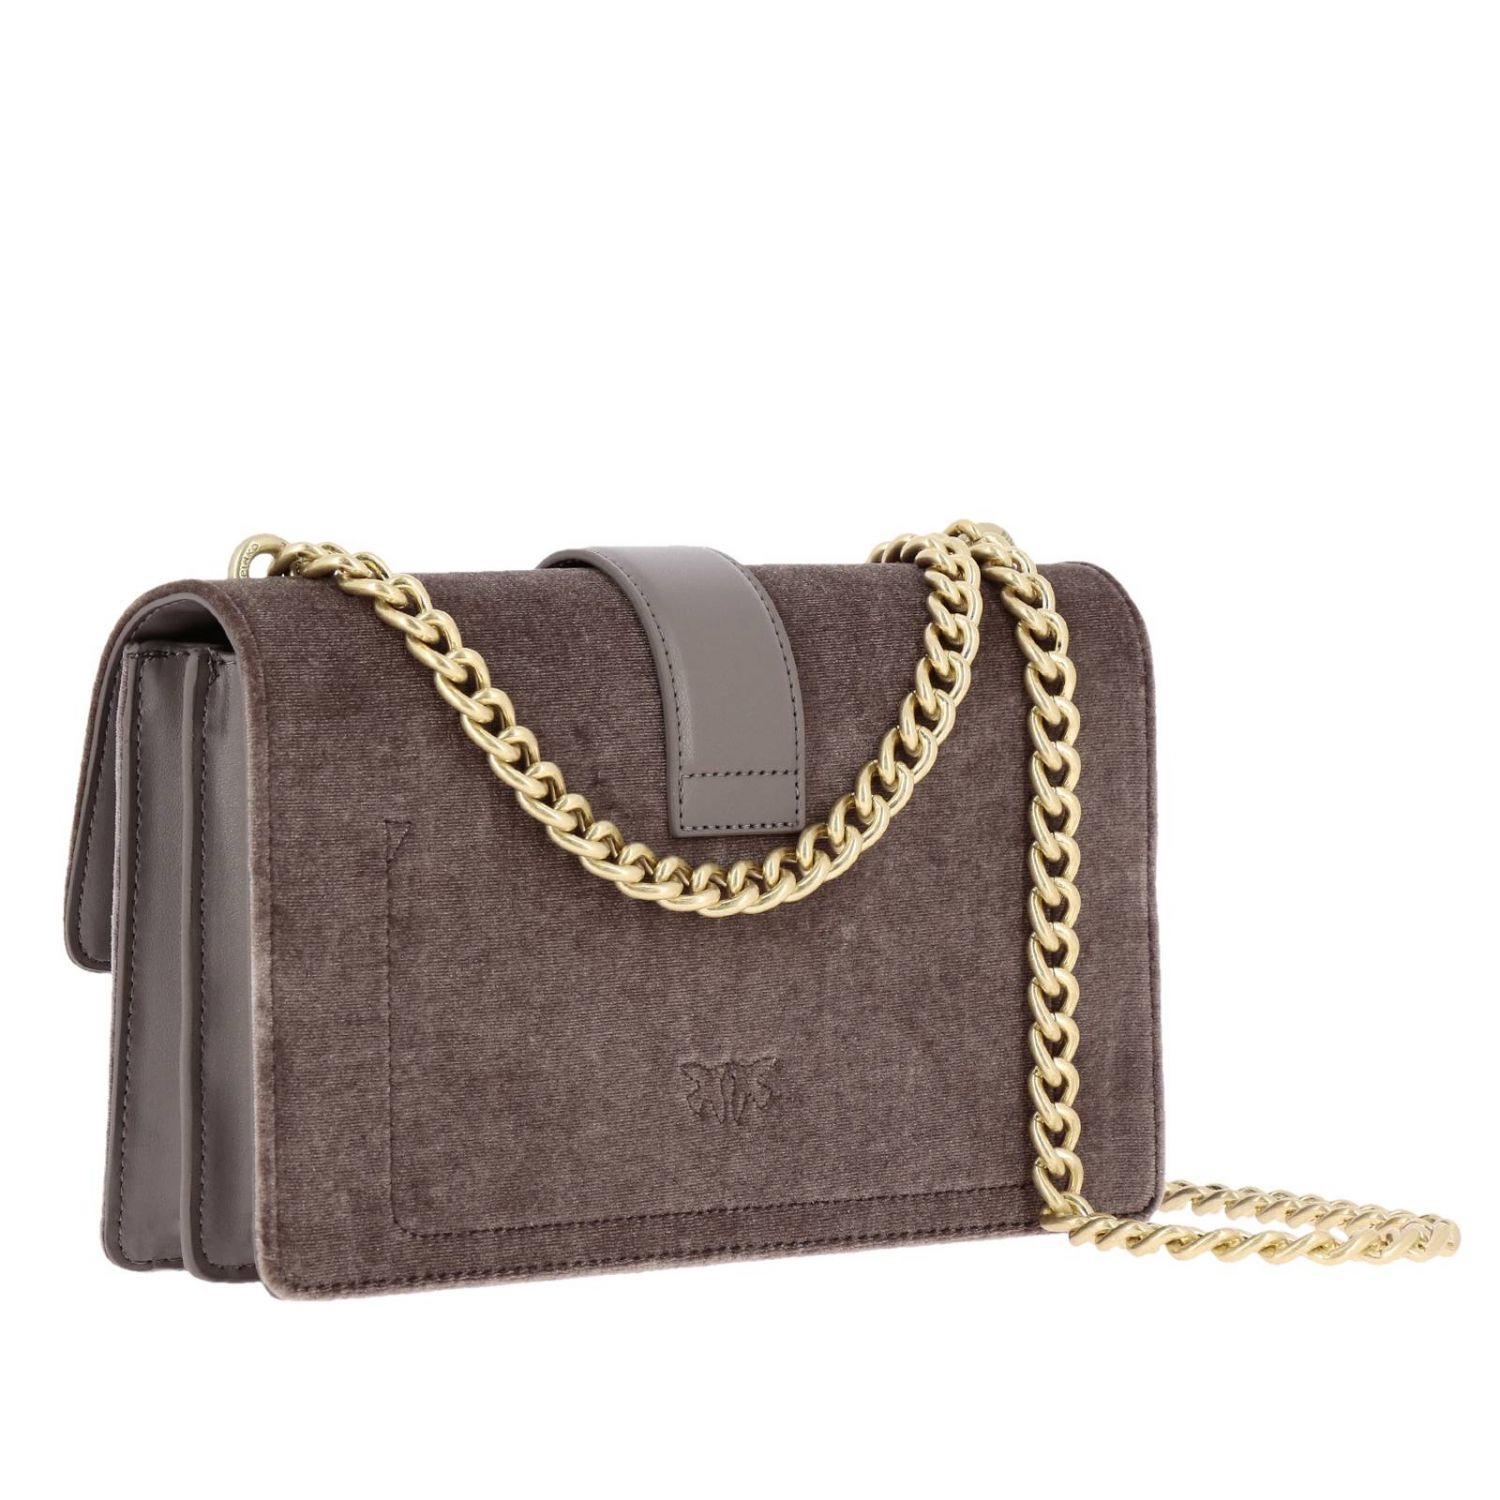 PINKO: Love Bag Velvet with Pearls and chain shoulder strap - Dove Grey ...